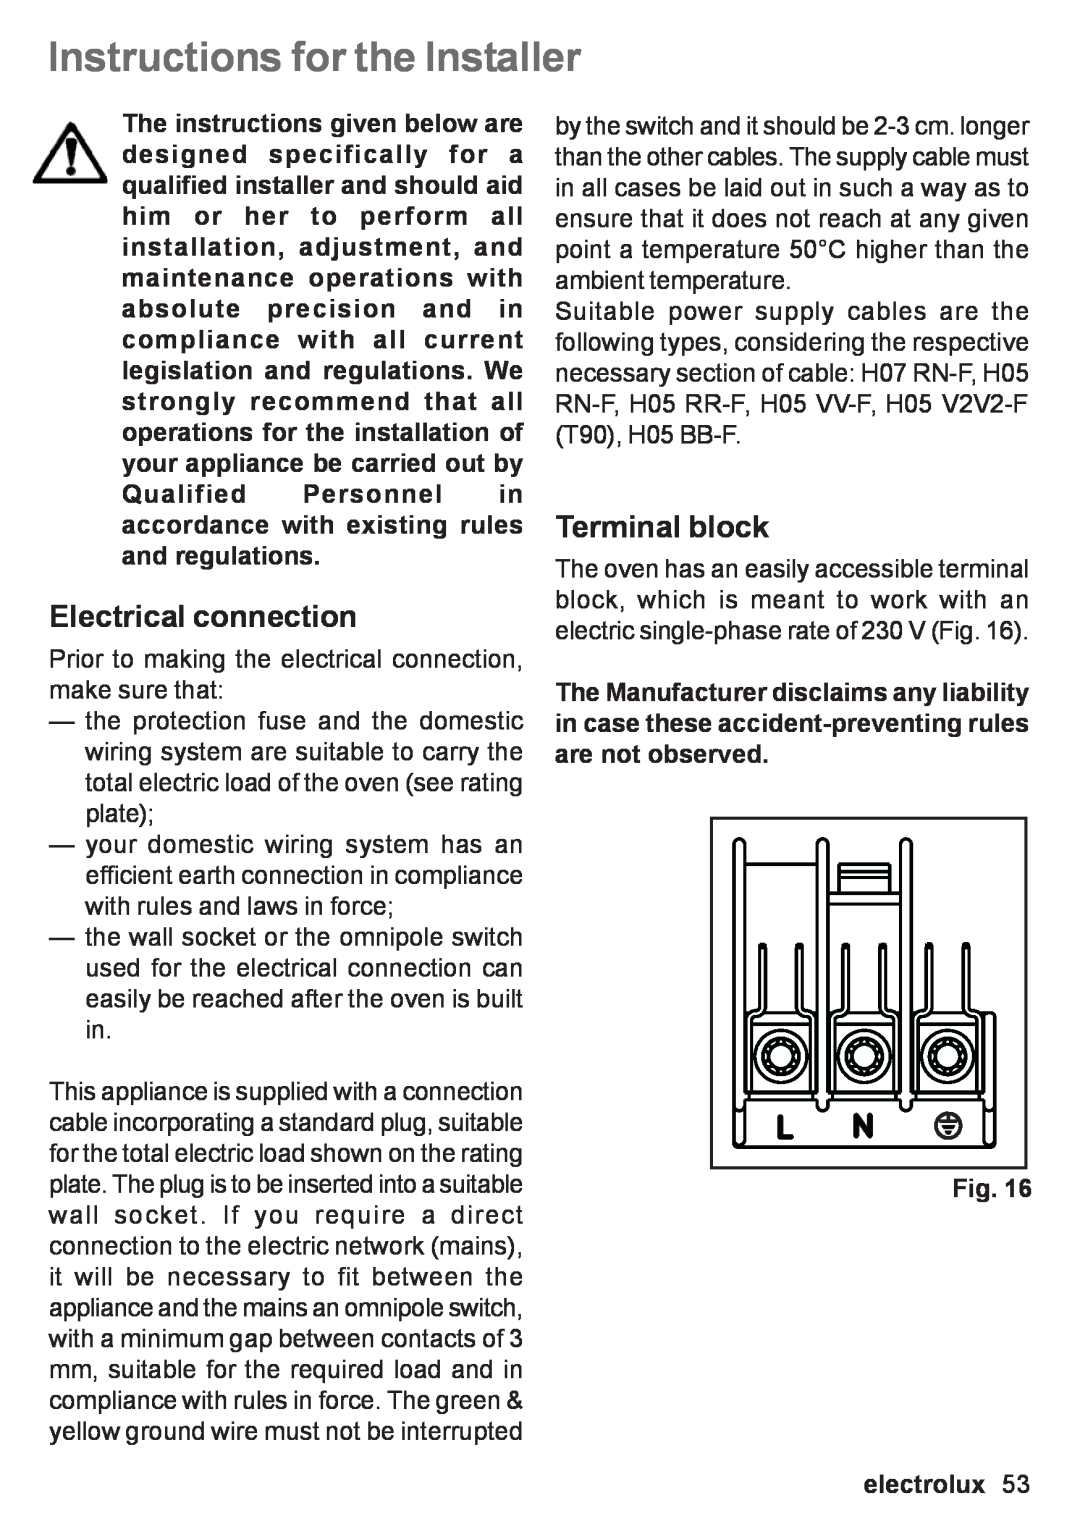 Electrolux EOB 53003 user manual Instructions for the Installer, Electrical connection, Terminal block, electrolux 